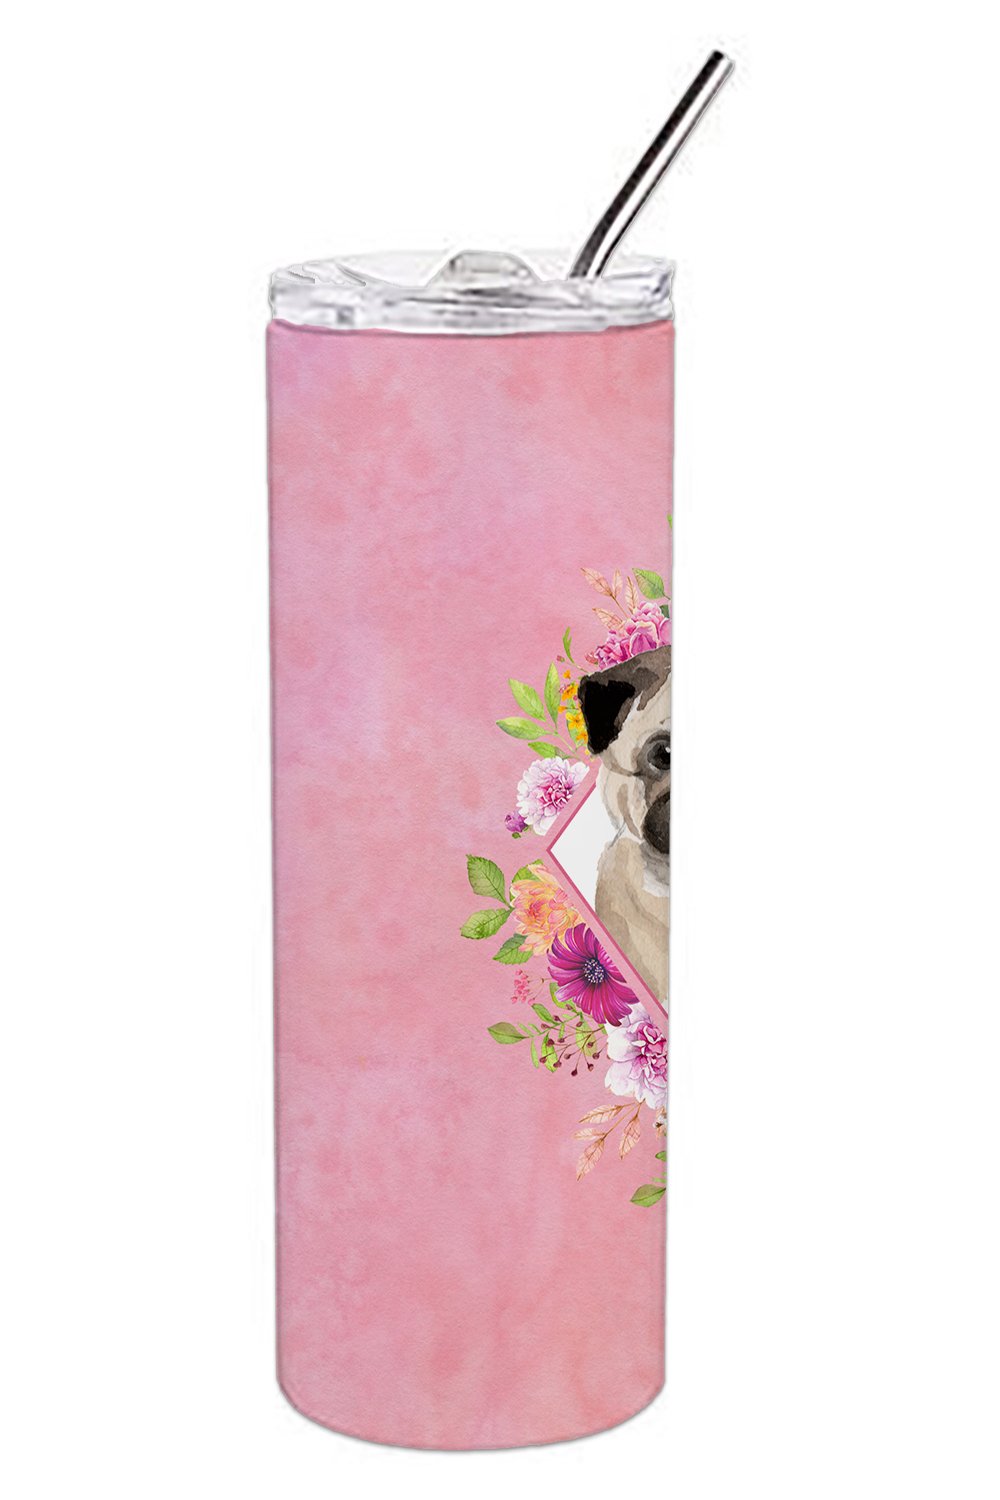 Fawn Pug Pink Flowers Double Walled Stainless Steel 20 oz Skinny Tumbler CK4218TBL20 by Caroline's Treasures